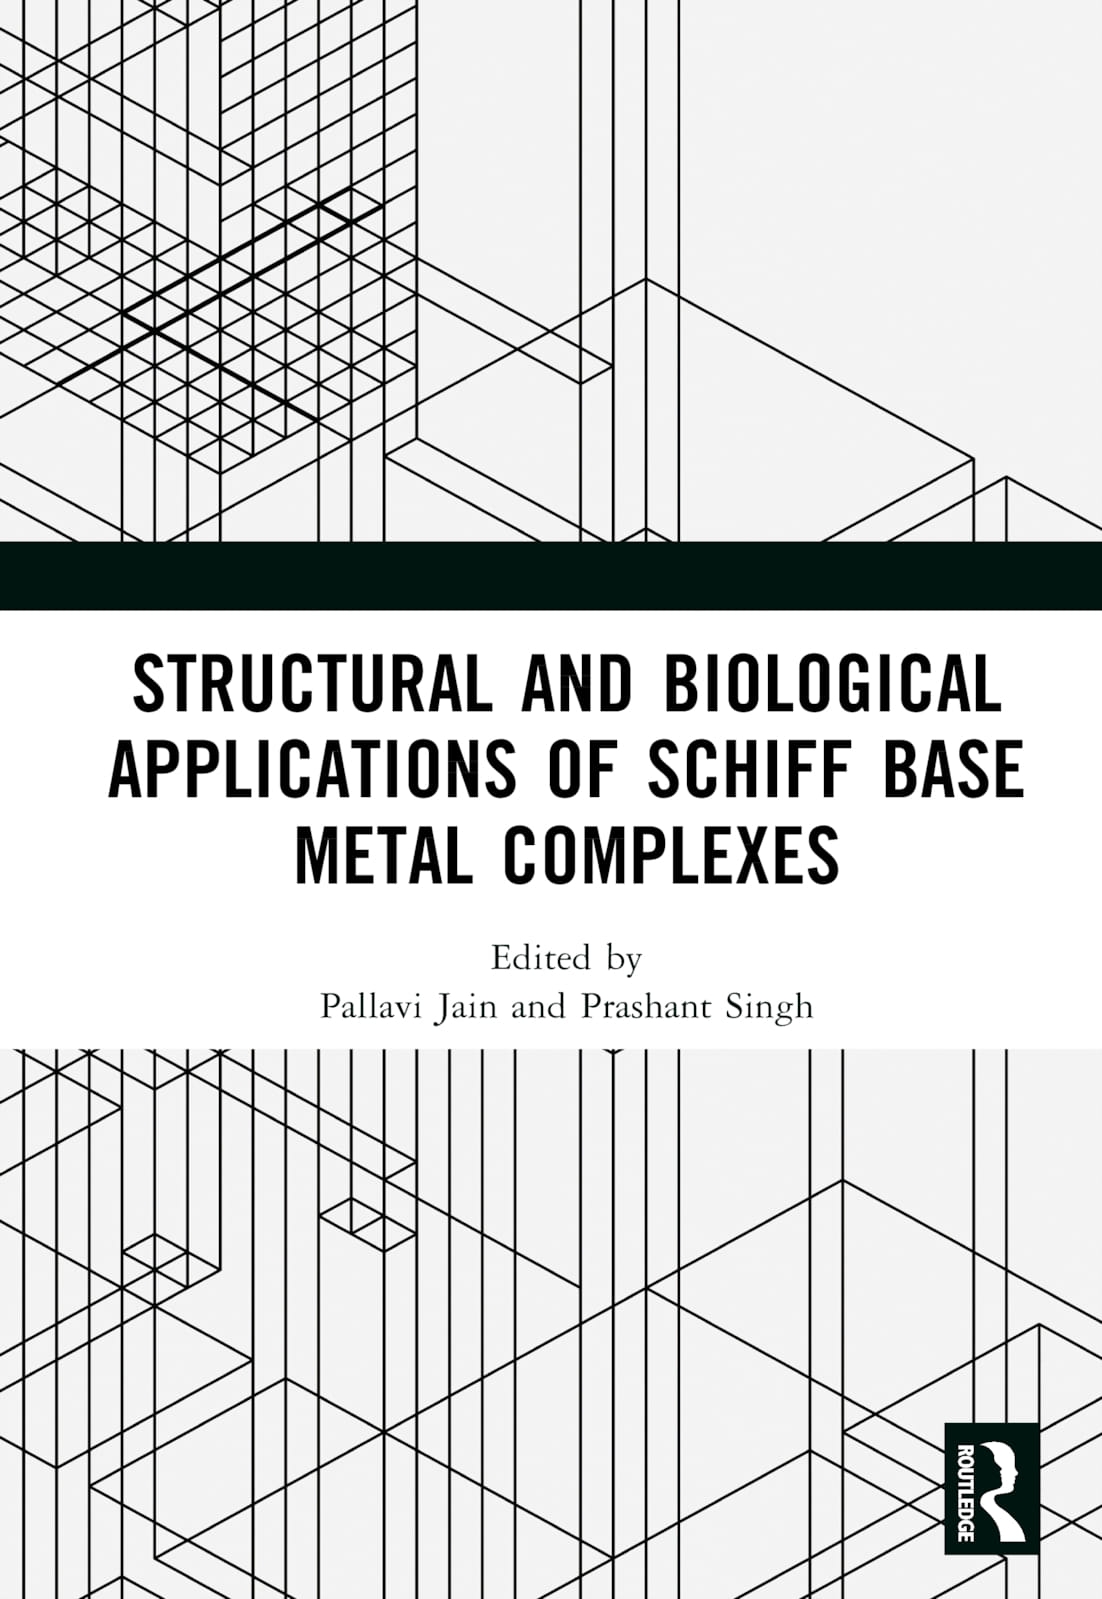 Structural, Biological, and Non-Biological Applications of Schiff Base Metal Complexes